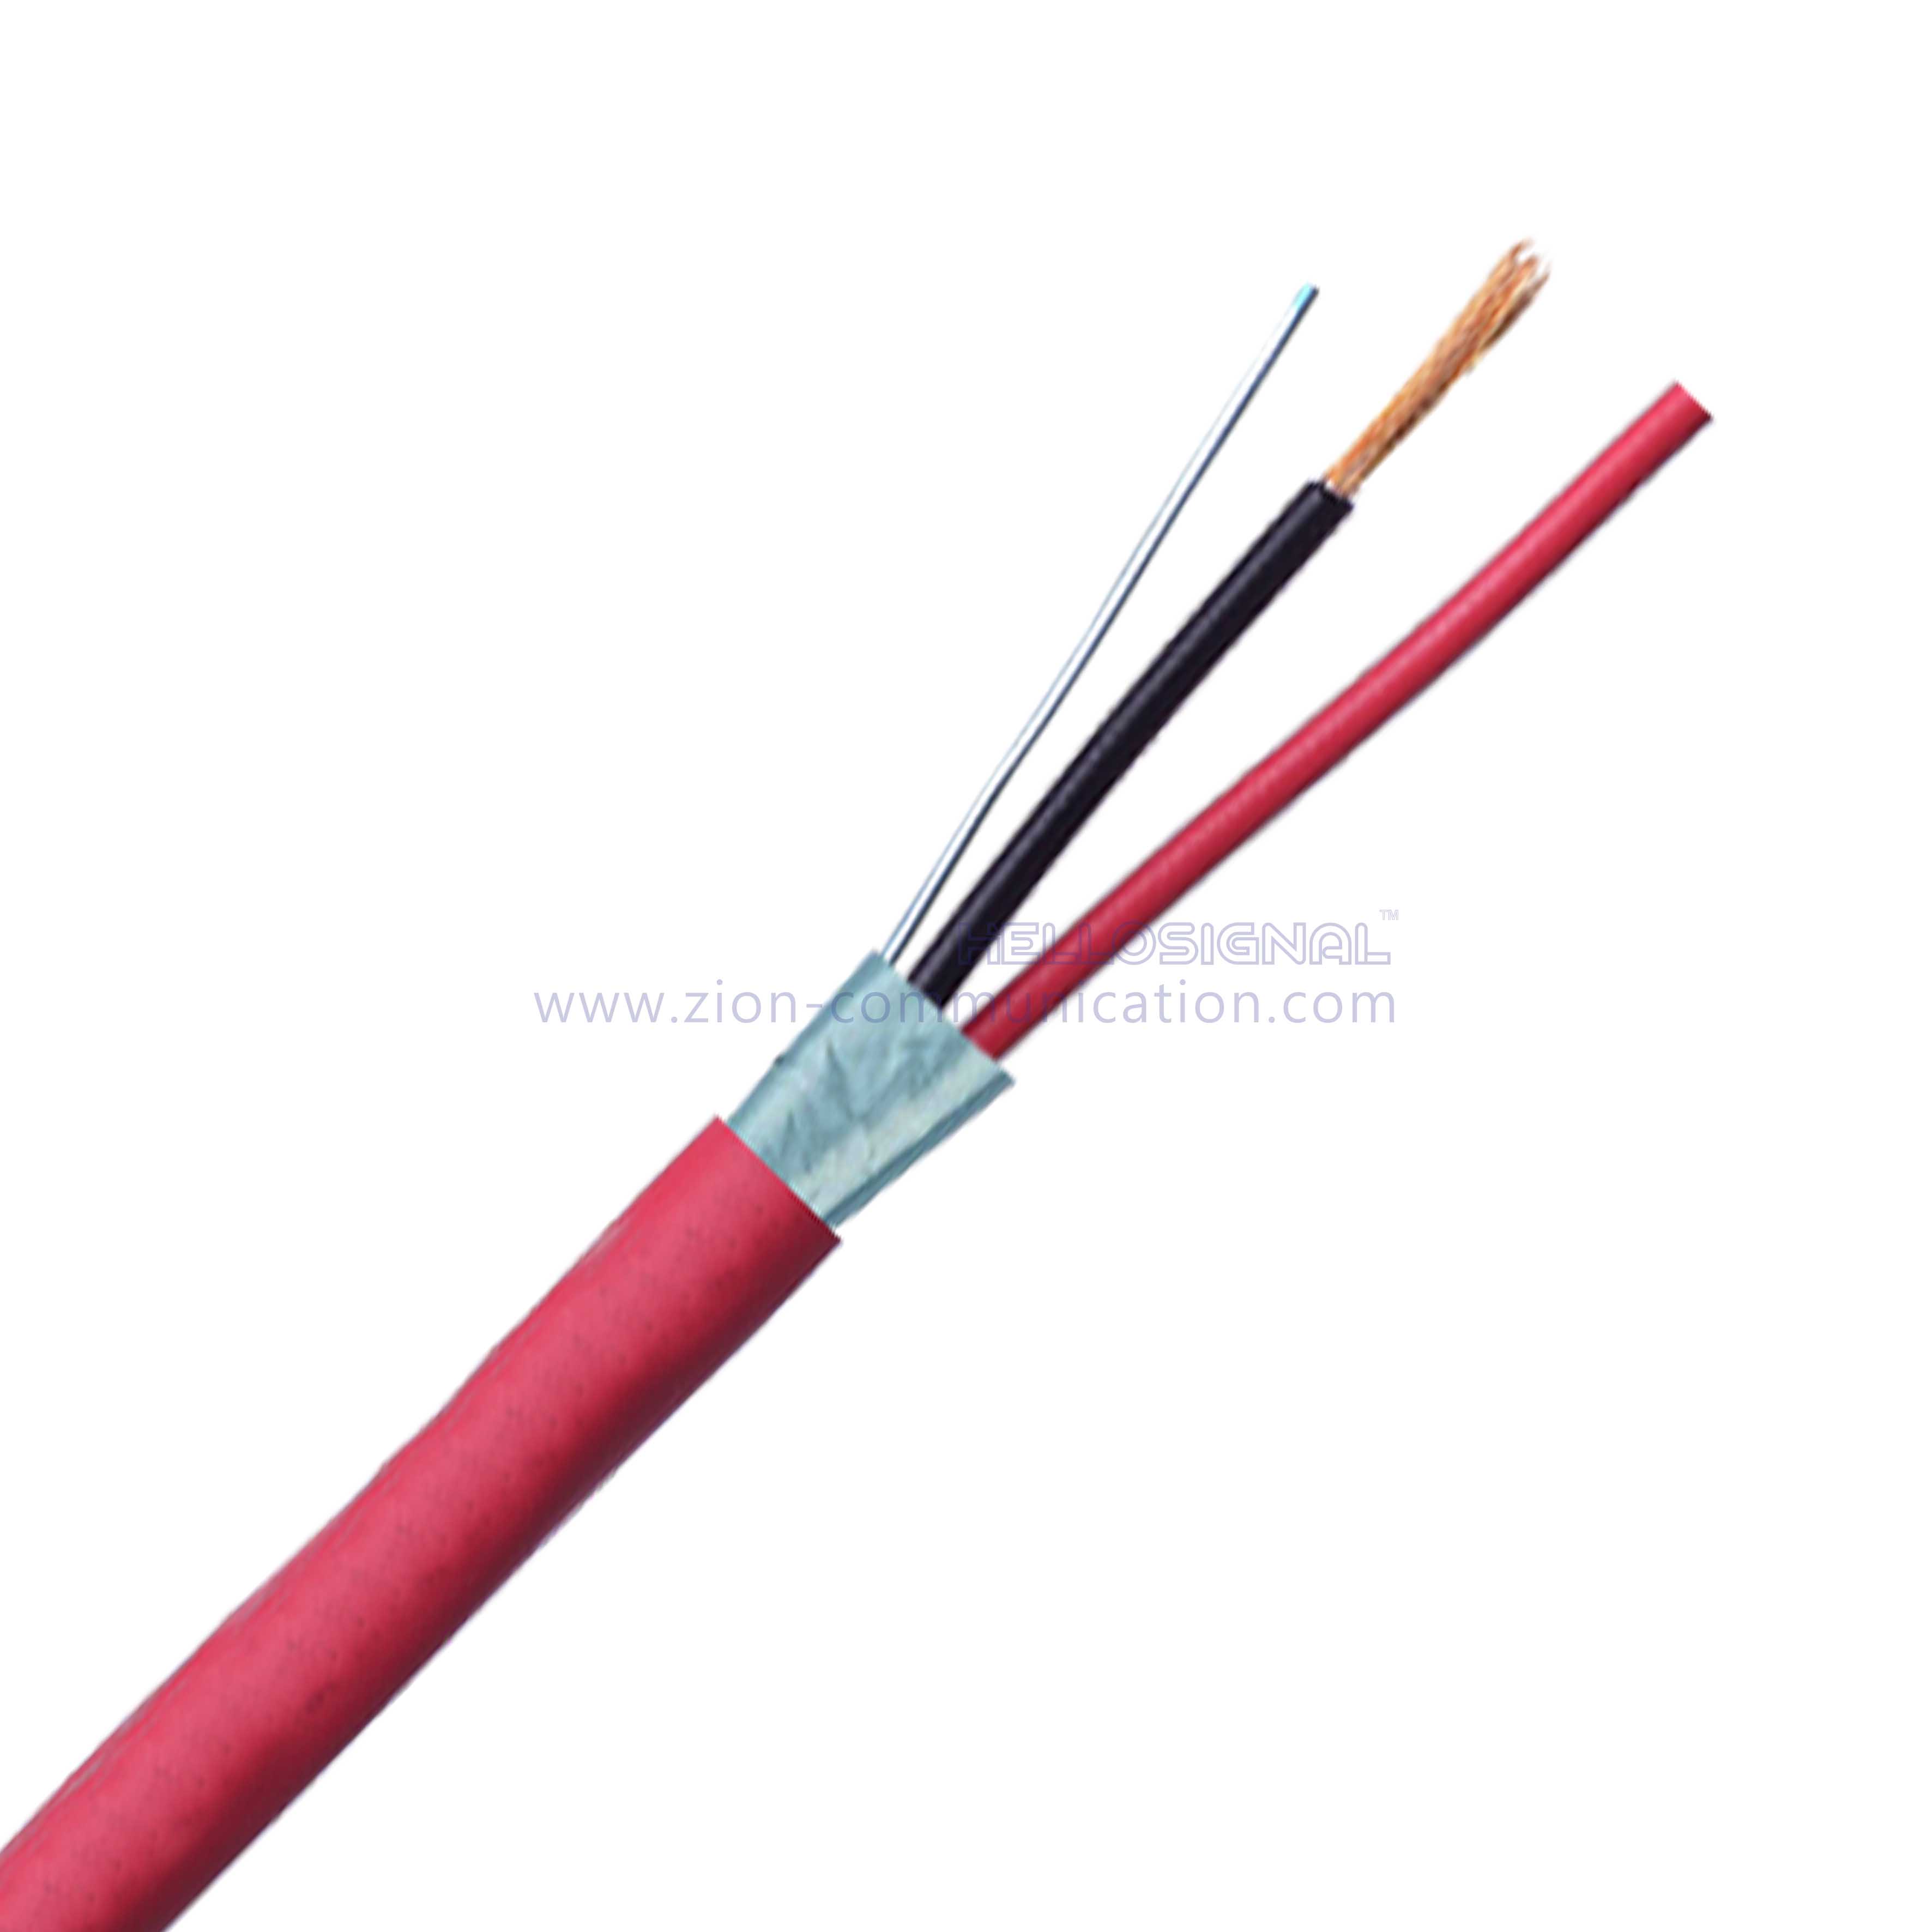 NO.7110349 12AWG 2/C STR Shielded FPLP-CL2P Fire Alarm Cables 